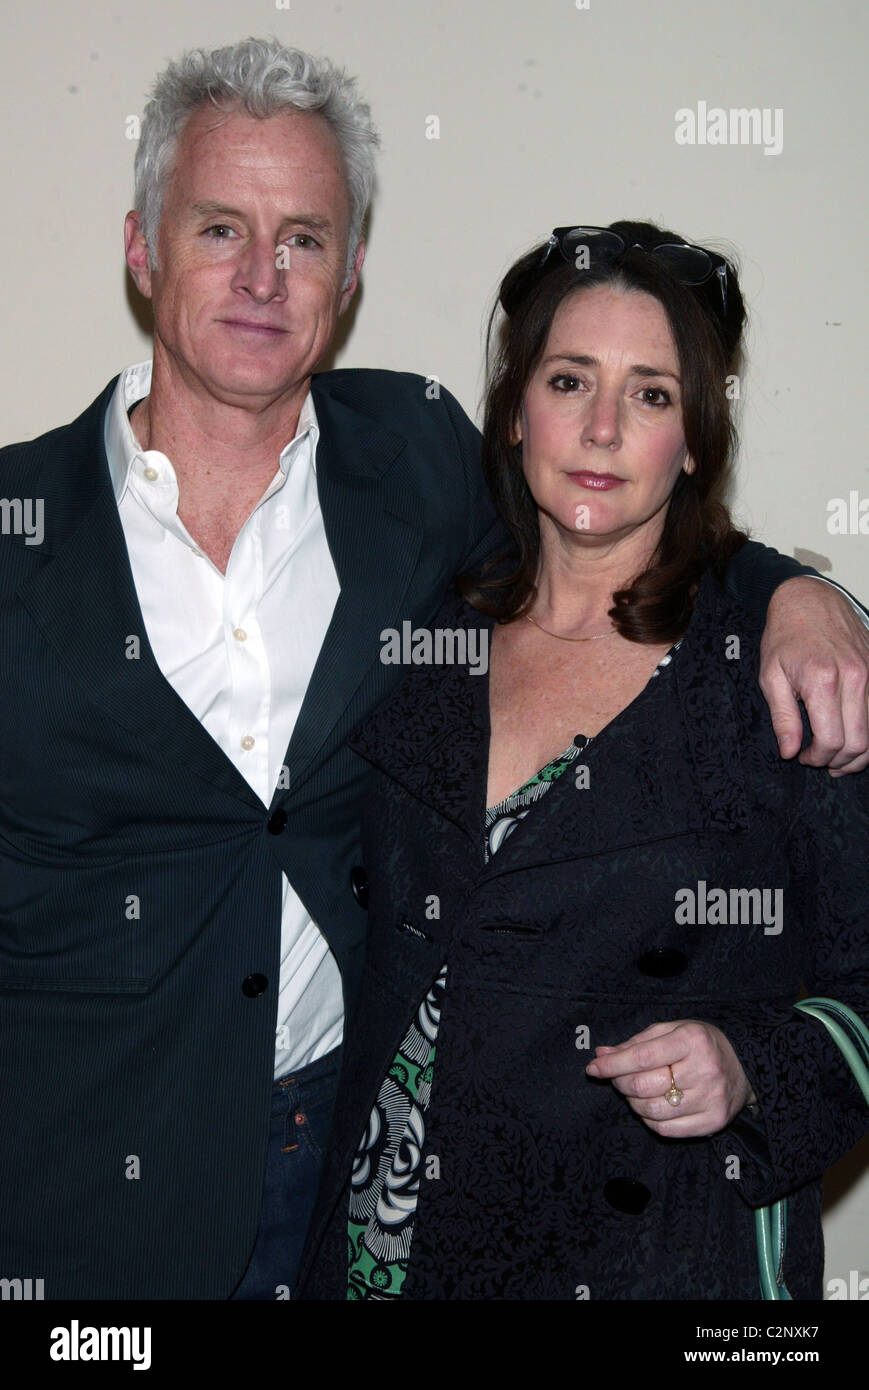 John Slattery and Talia Balsam attending 'Lean On Me' the 6th Annual Our Time Theatre Gala at the Skirball Center for the Stock Photo